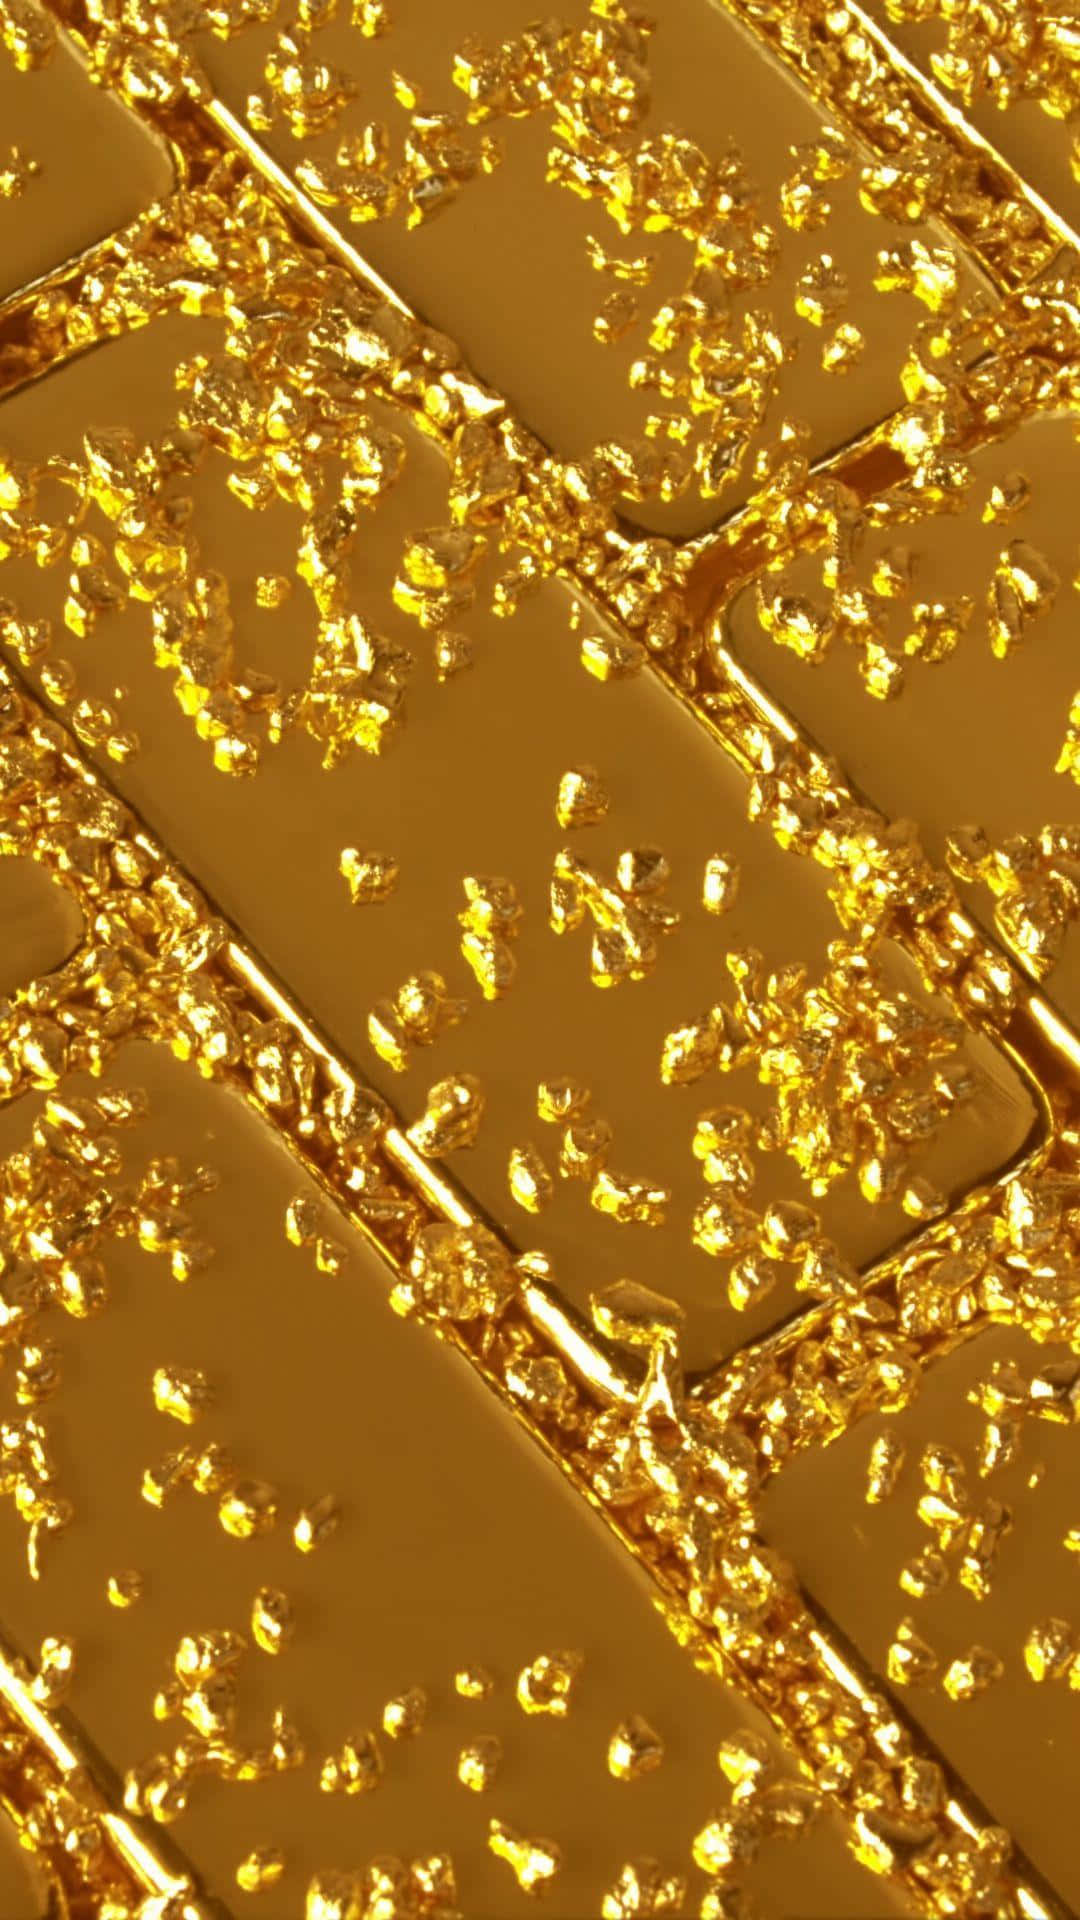 Unbox A Stunning Gold Iphone And Keep The Gold-themed Glamour Going. Background